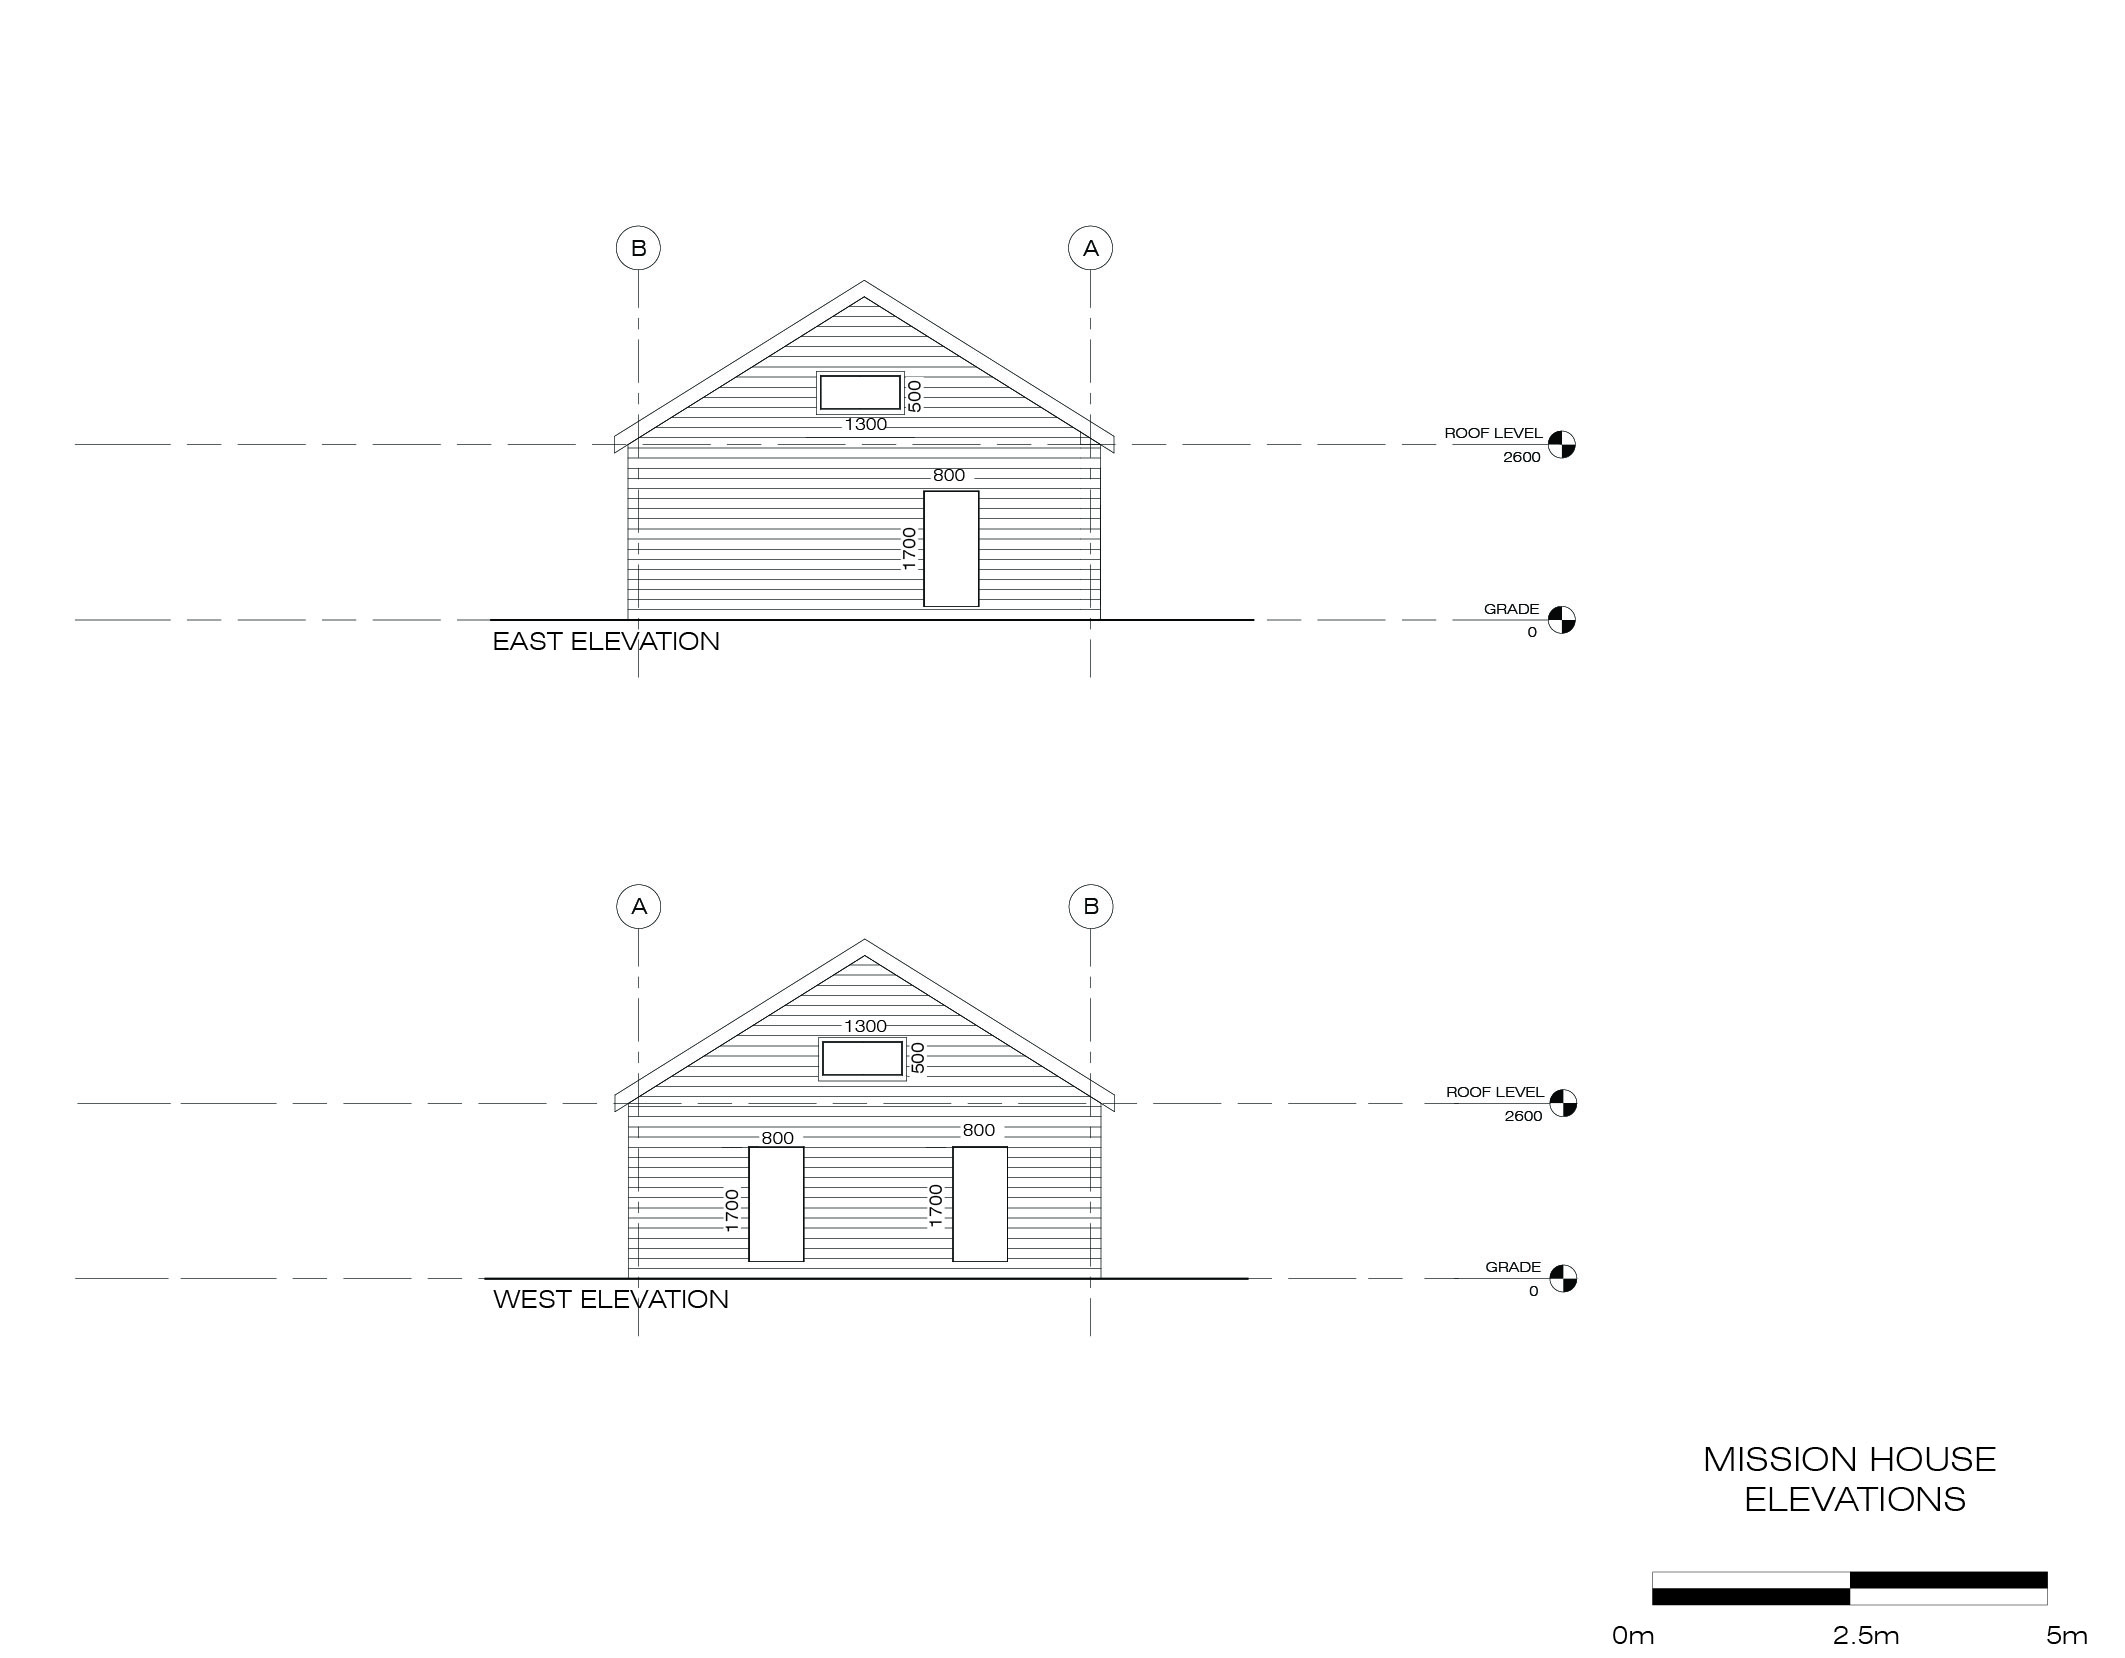 East and West Elevations of the Anglican Mission House